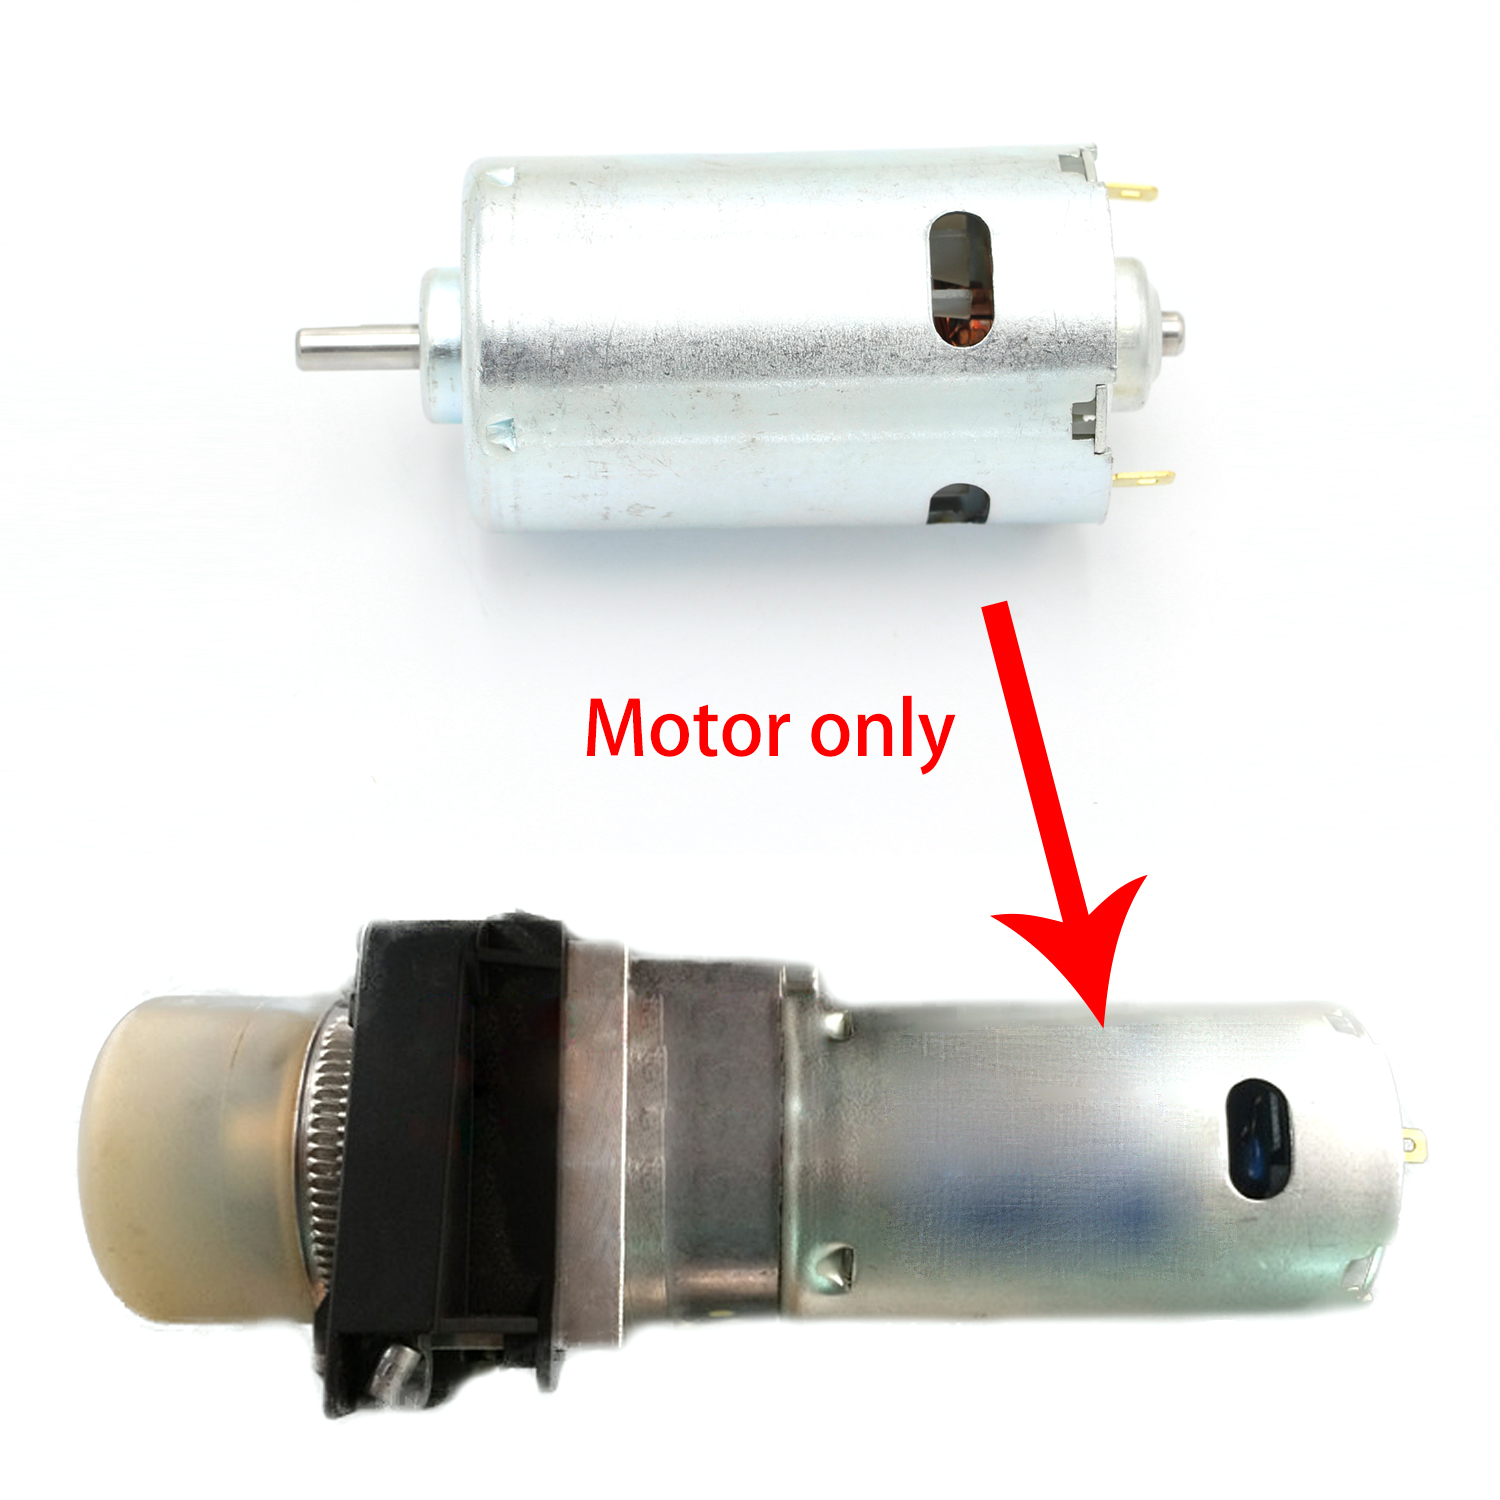 New Convertible Top Hydraulic Roof Pump Motor Fits For 2003 2008 Bmw Z4